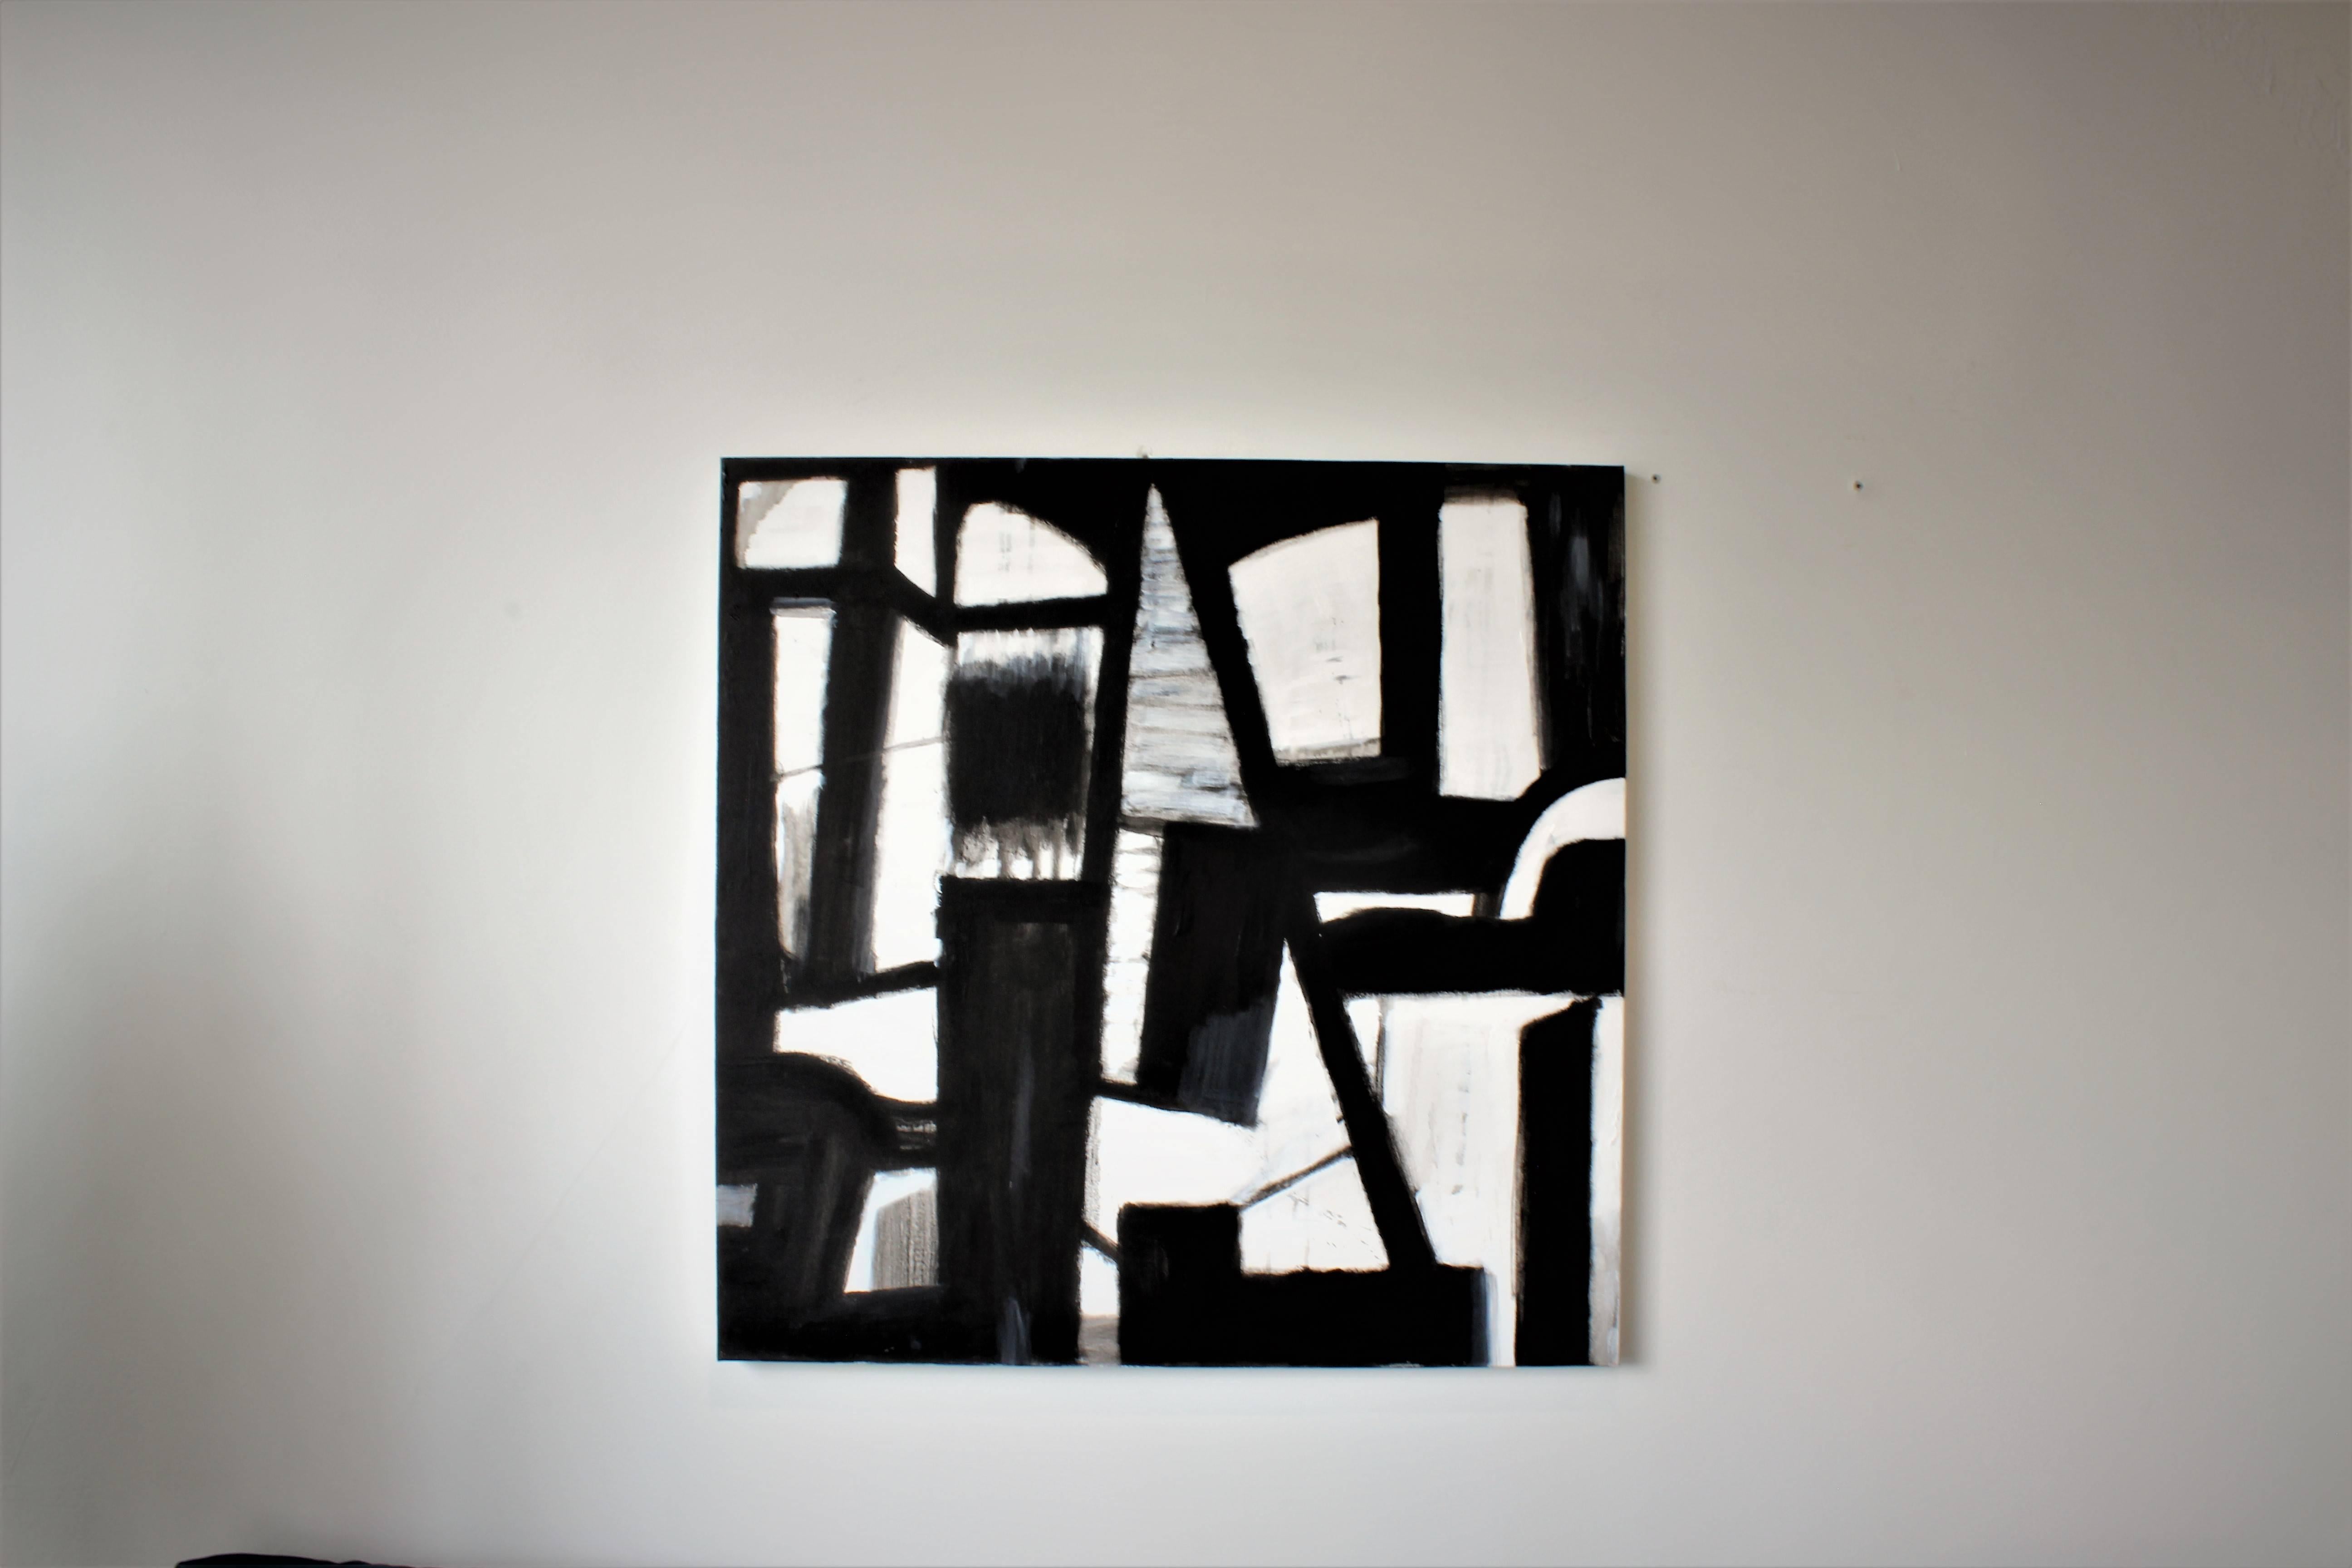 Original black and white abstract painting by Brian Potter, NYC, 2016. Incredible layers and detail. Brian's abstract and cubist style is influenced by Paul Klee, Willem de Kooning, Gerhard Richter, Robert Rauschenberg and Franz Kline.